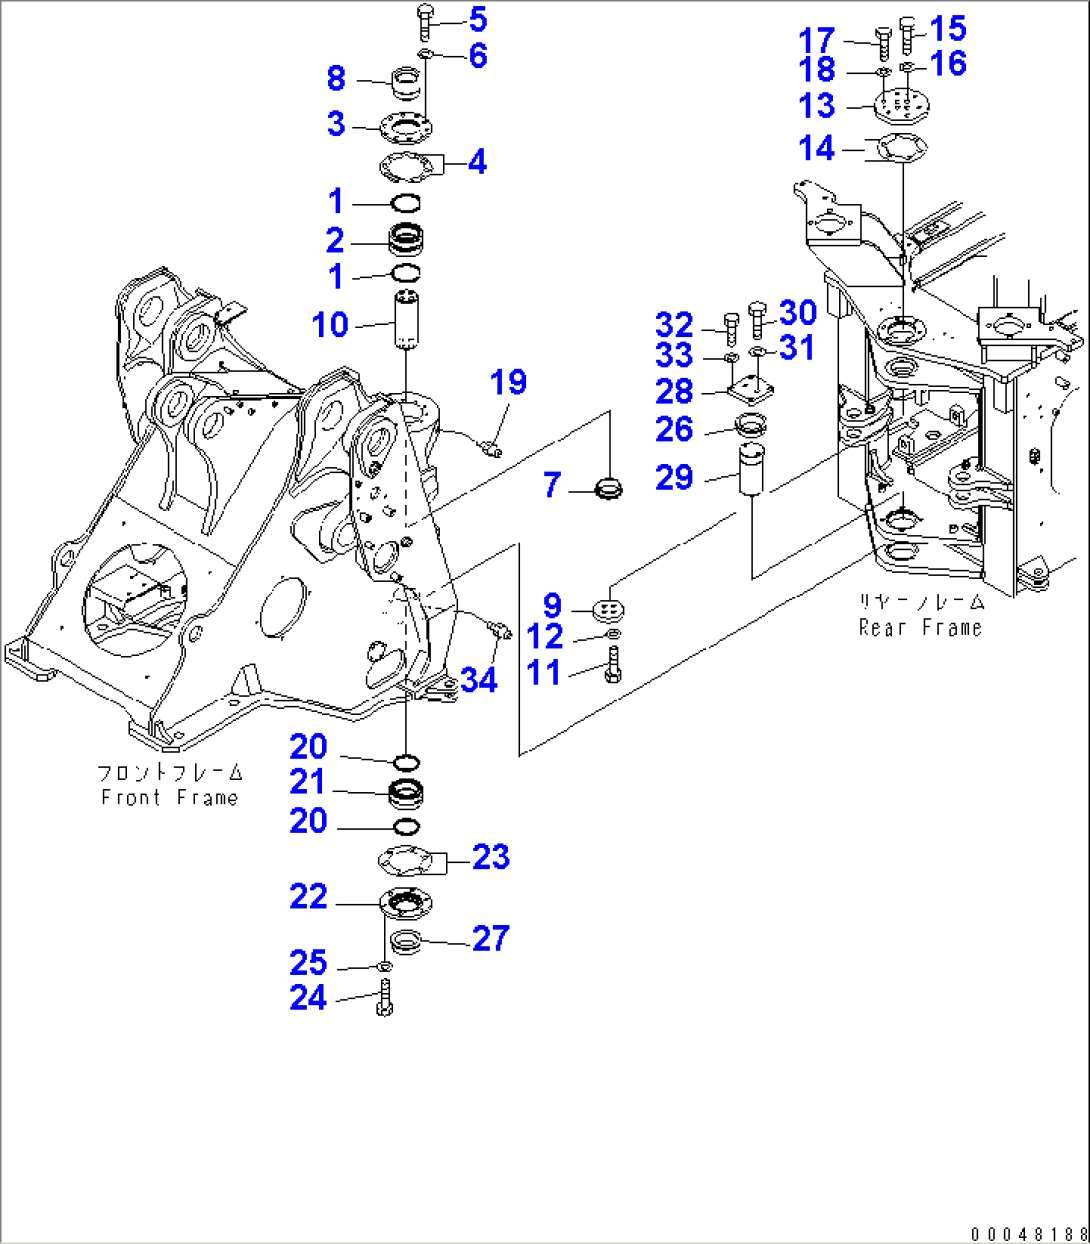 HINGE PIN (FOR FRONT AND REAR FRAME CONNECTING)(#55001-)